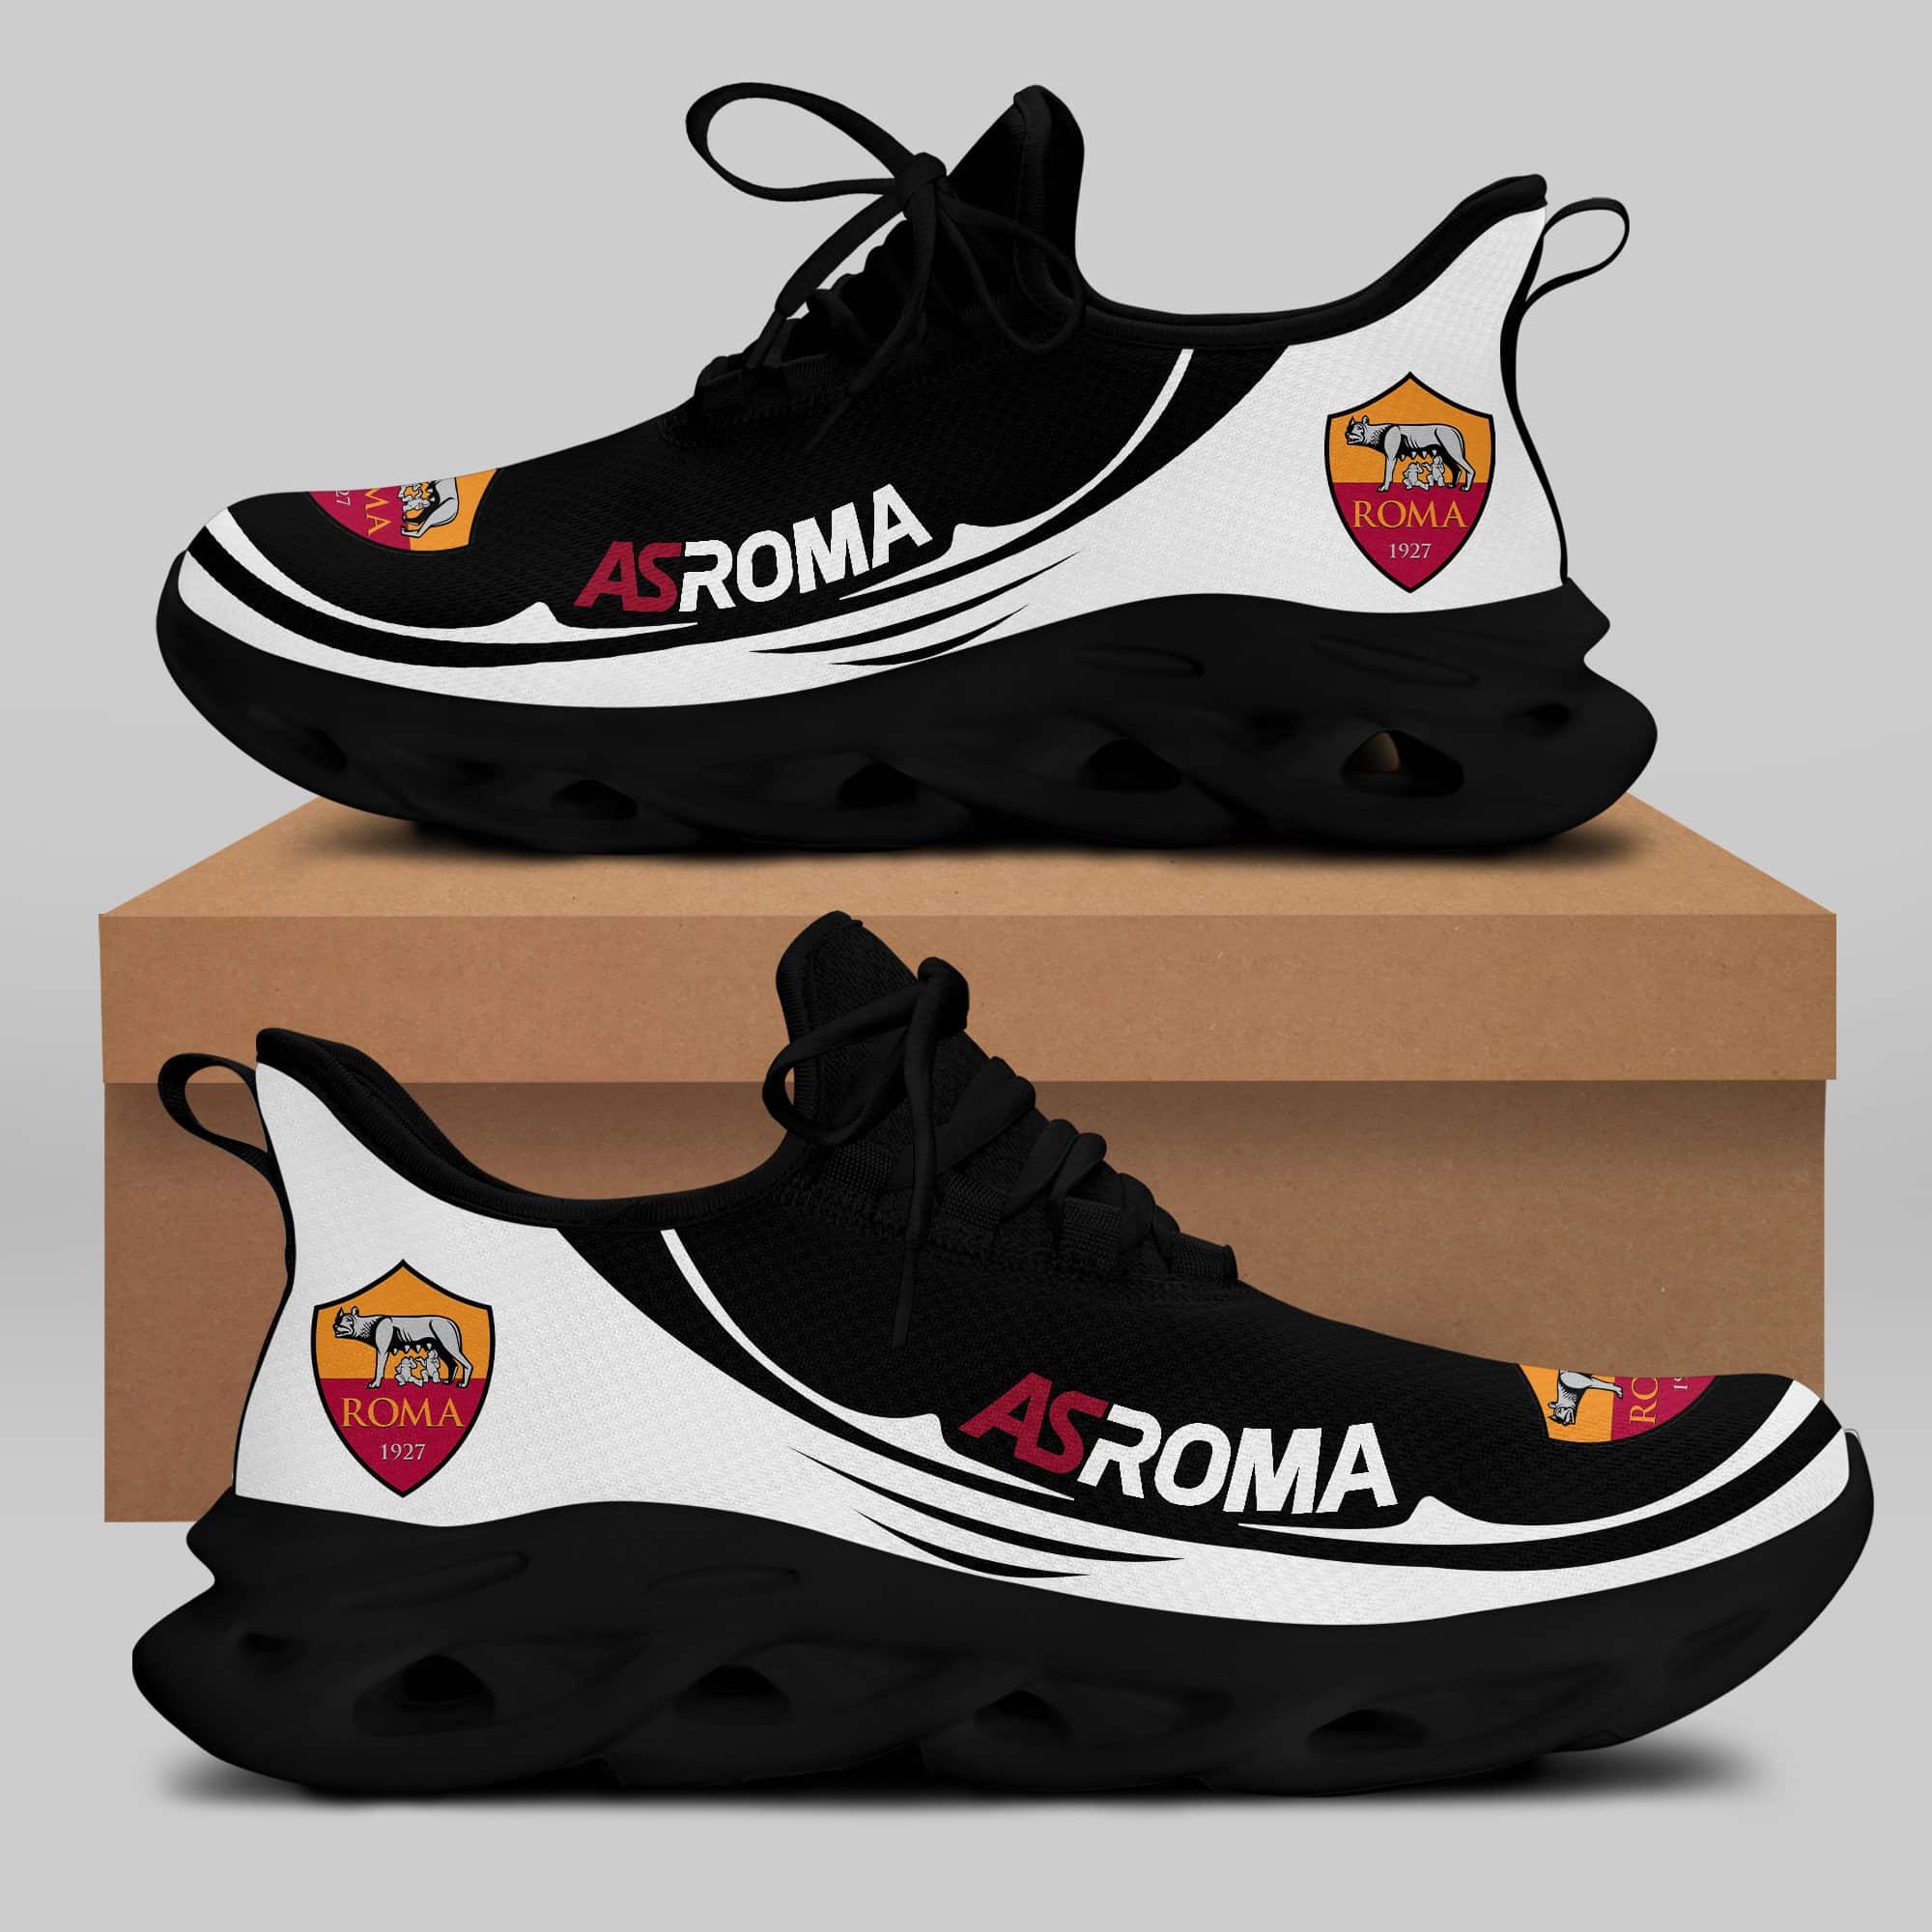 As Roma Running Shoes Max Soul Shoes Sneakers Ver 37 1